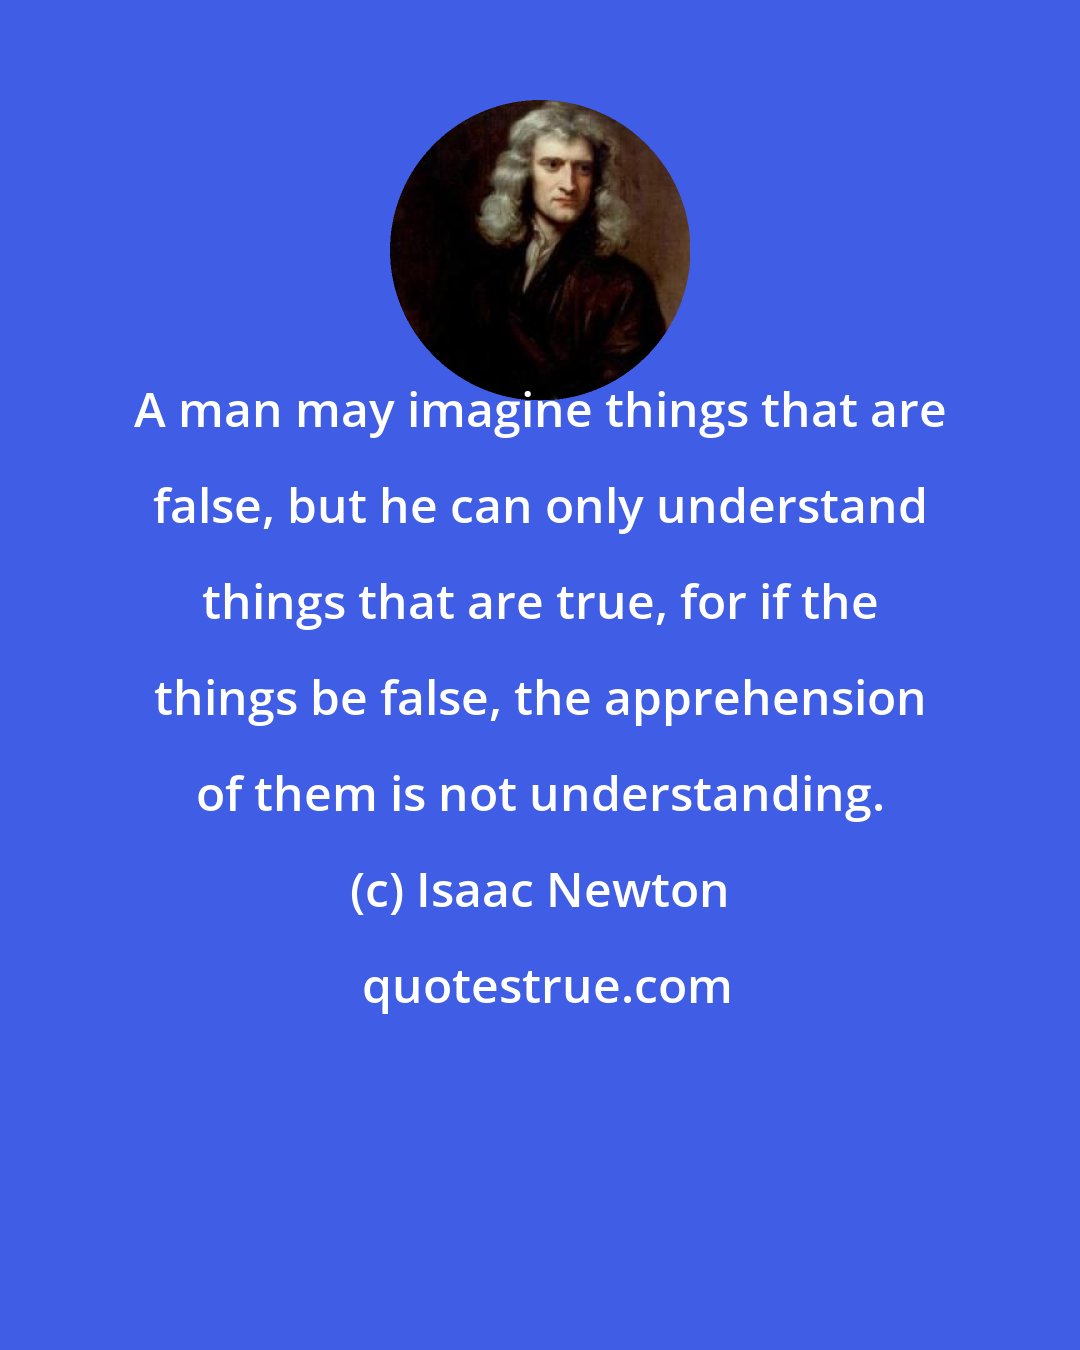 Isaac Newton: A man may imagine things that are false, but he can only understand things that are true, for if the things be false, the apprehension of them is not understanding.